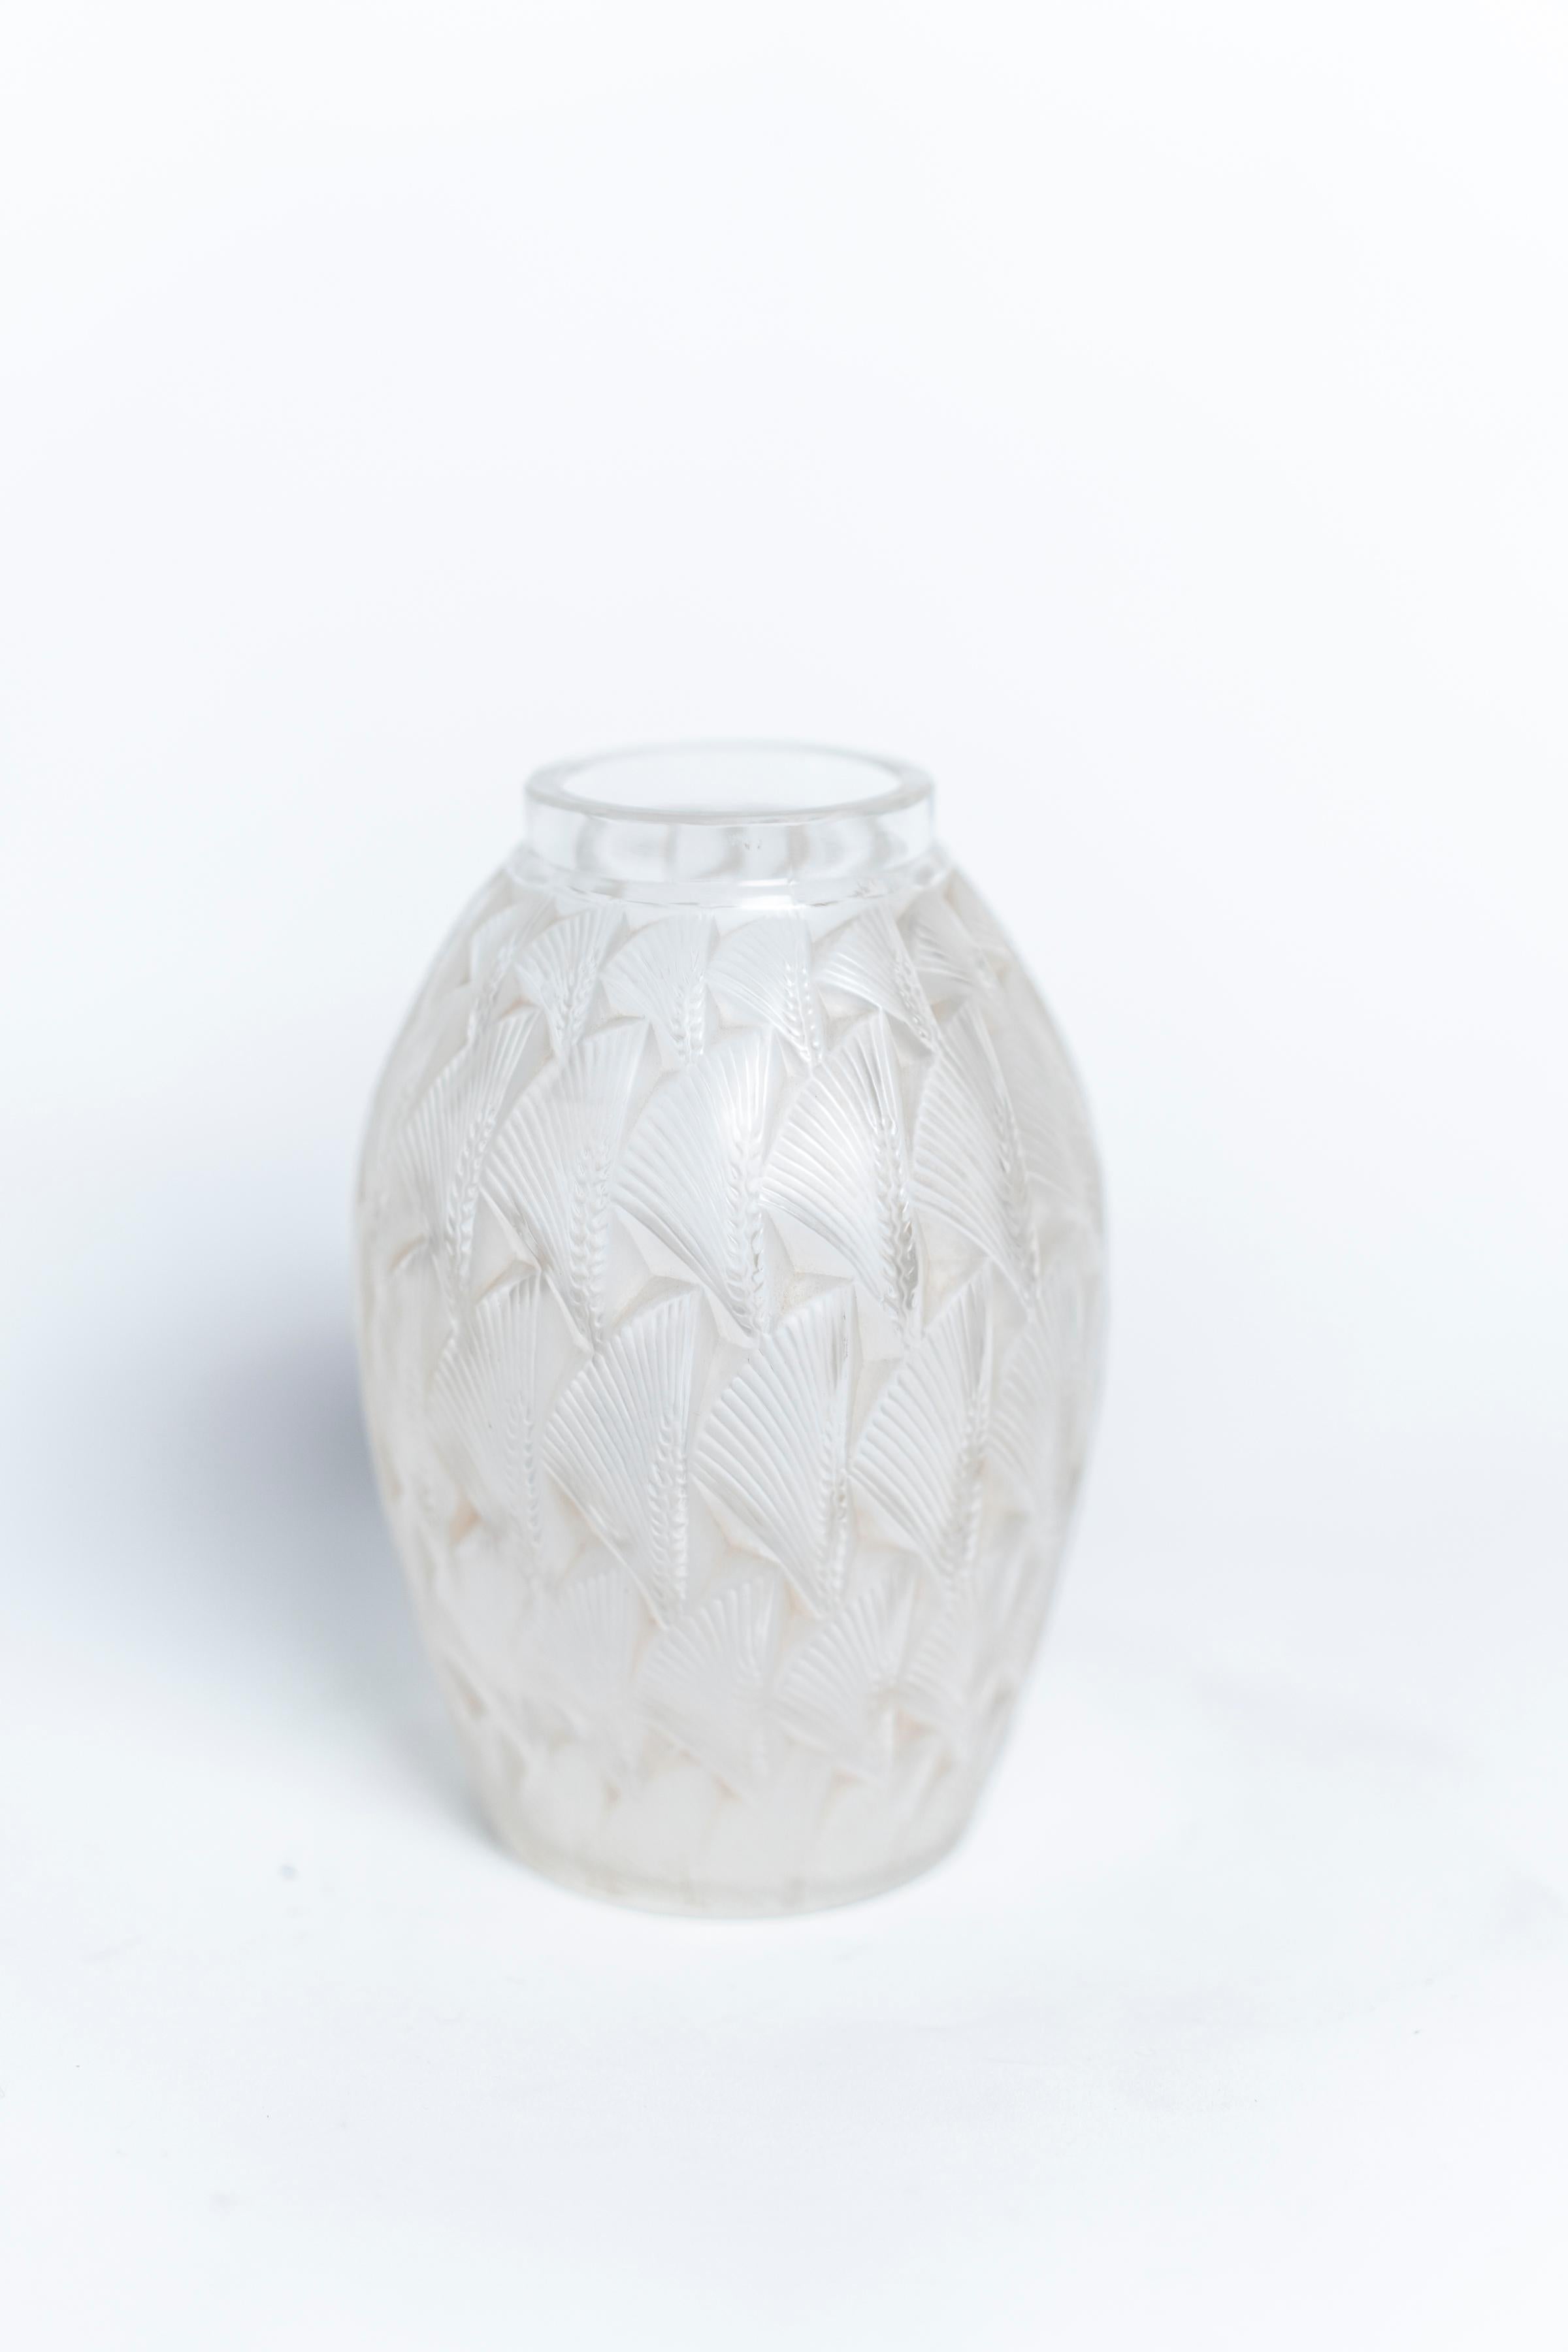 René Buthaud Vases and Vessels - 3 For Sale at 1stDibs